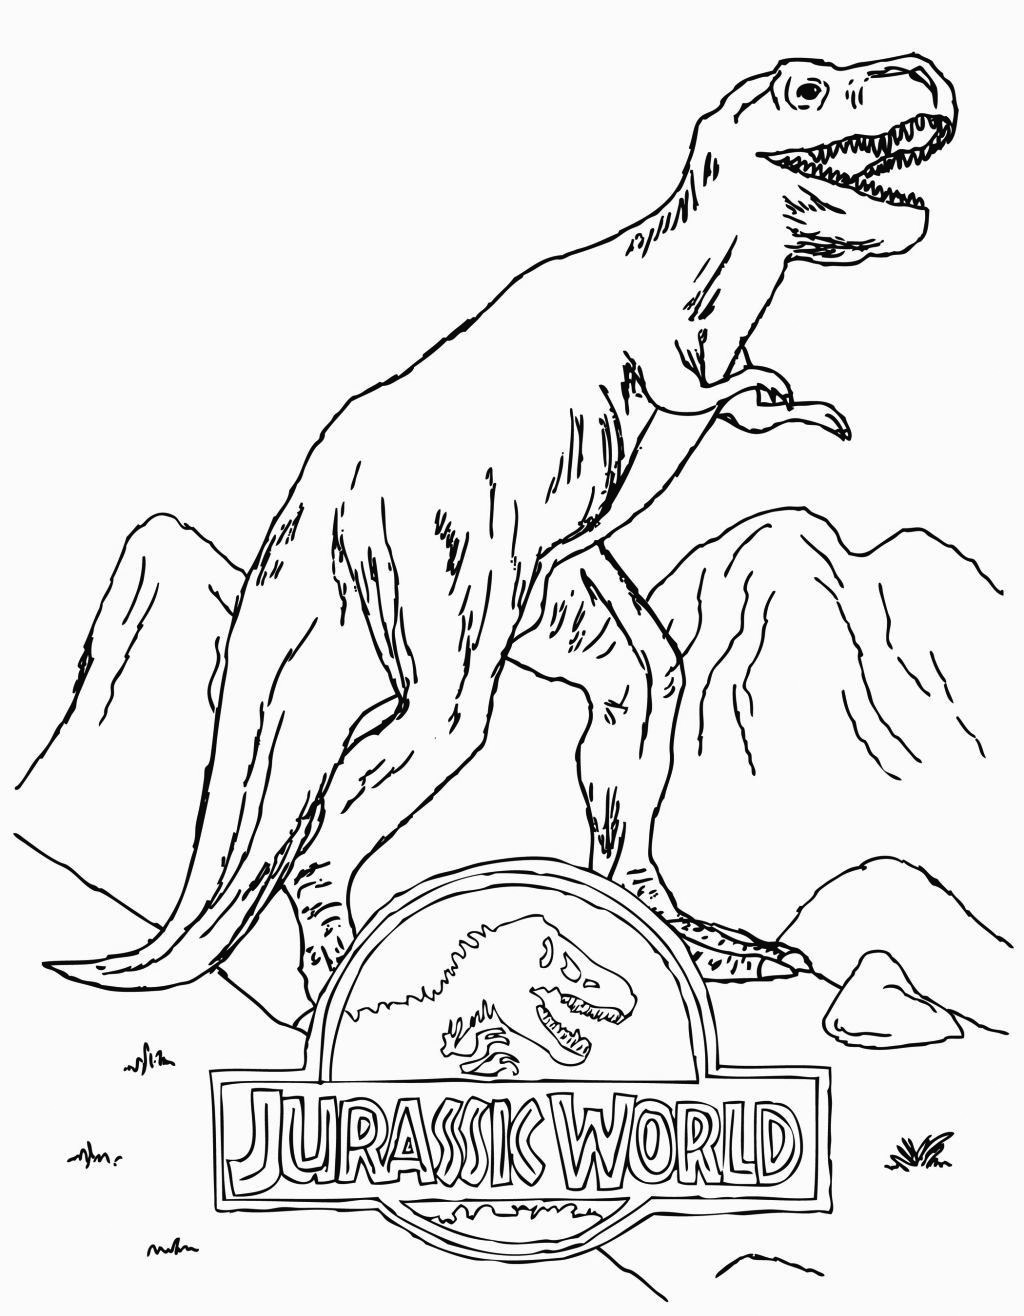 Jurassic Worlds Coloring Pages   Coloring Cool